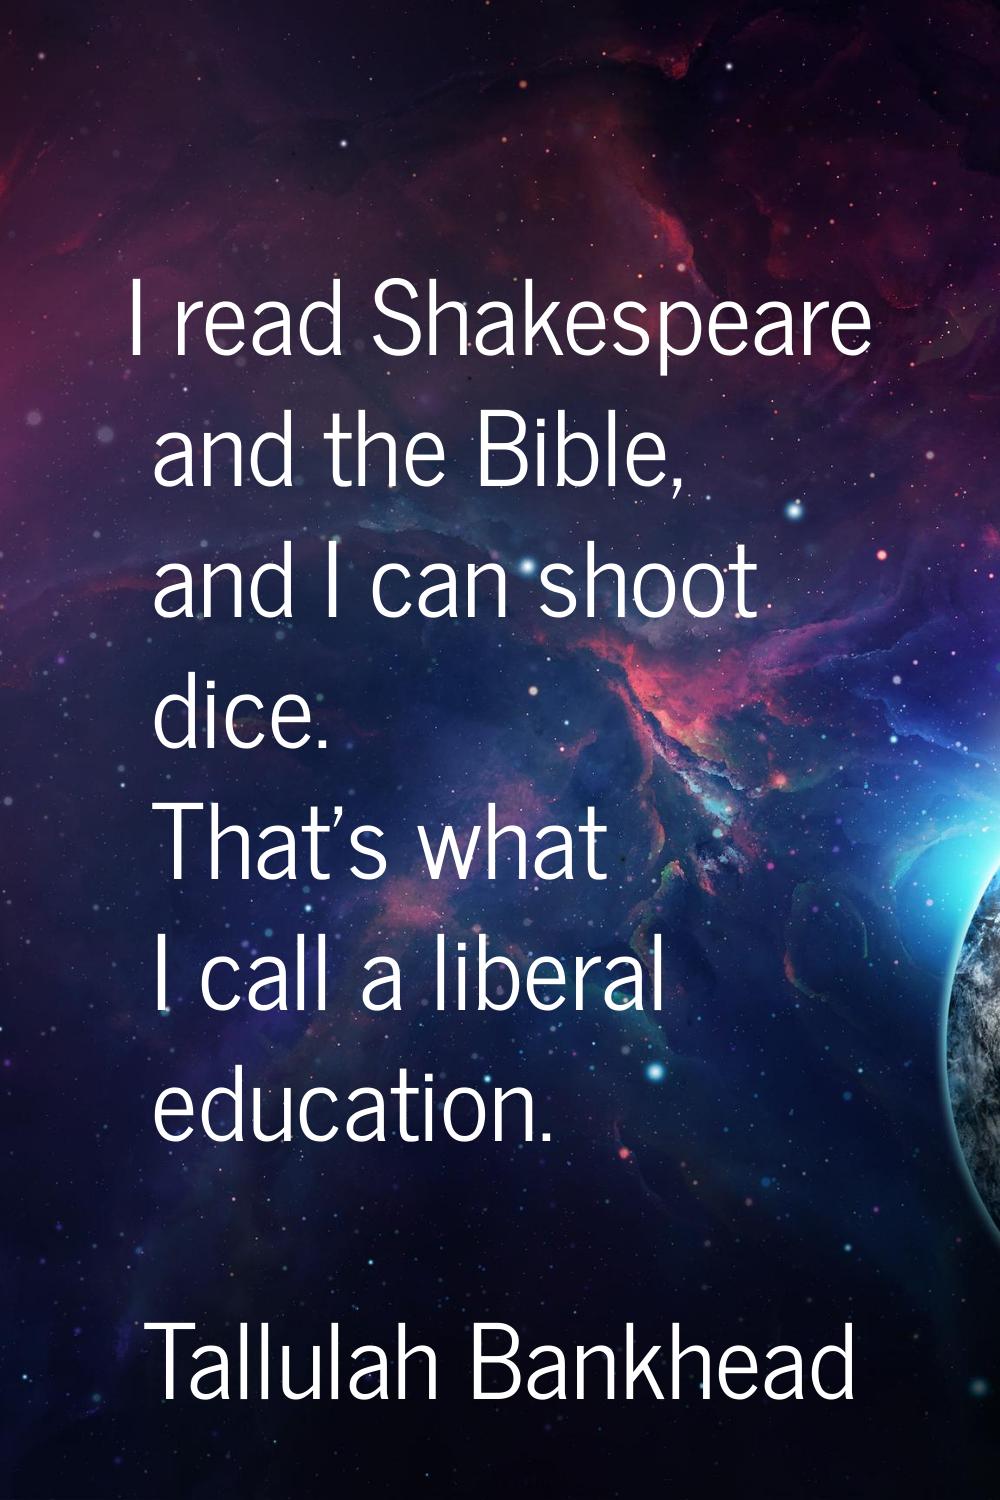 I read Shakespeare and the Bible, and I can shoot dice. That's what I call a liberal education.